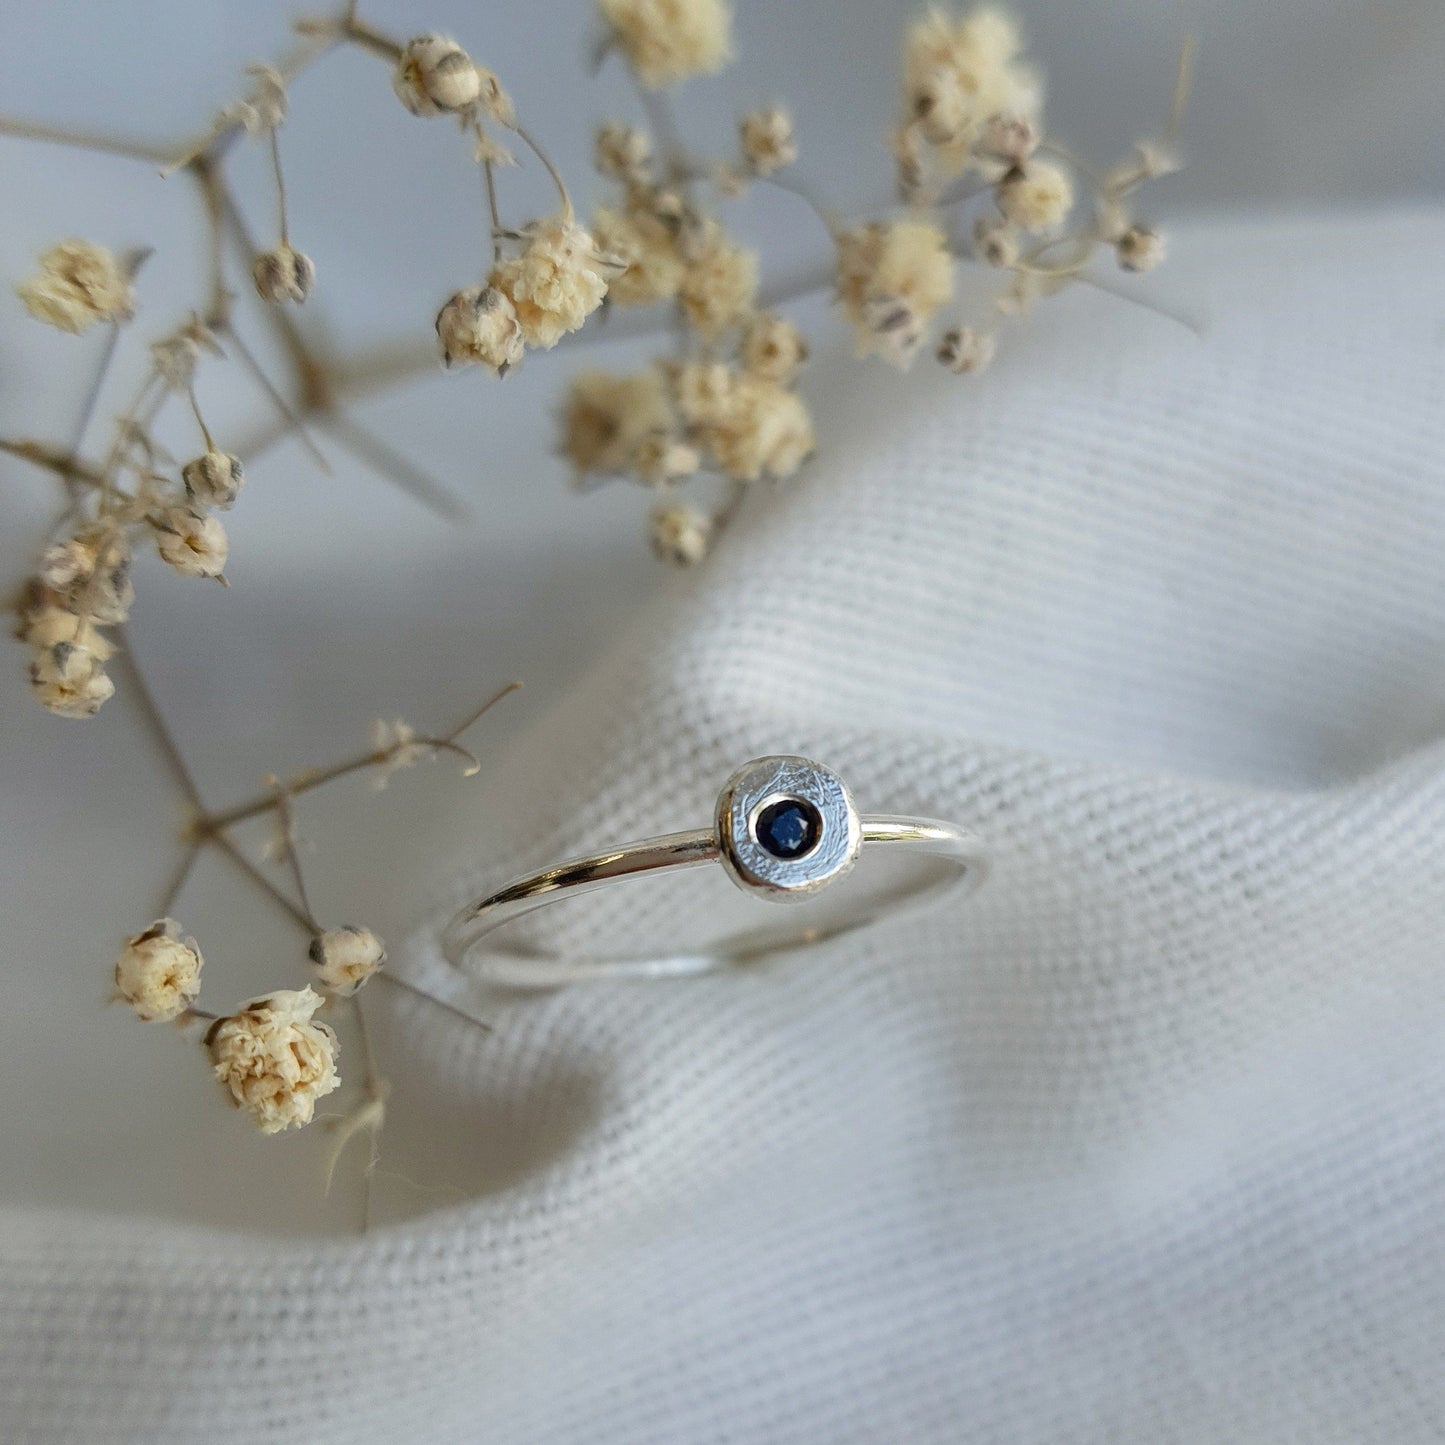 Sapphire & Silver Stacking Ring  - Handmade Silver Stacking Rings by Anna Calvert Jewellery in the UK